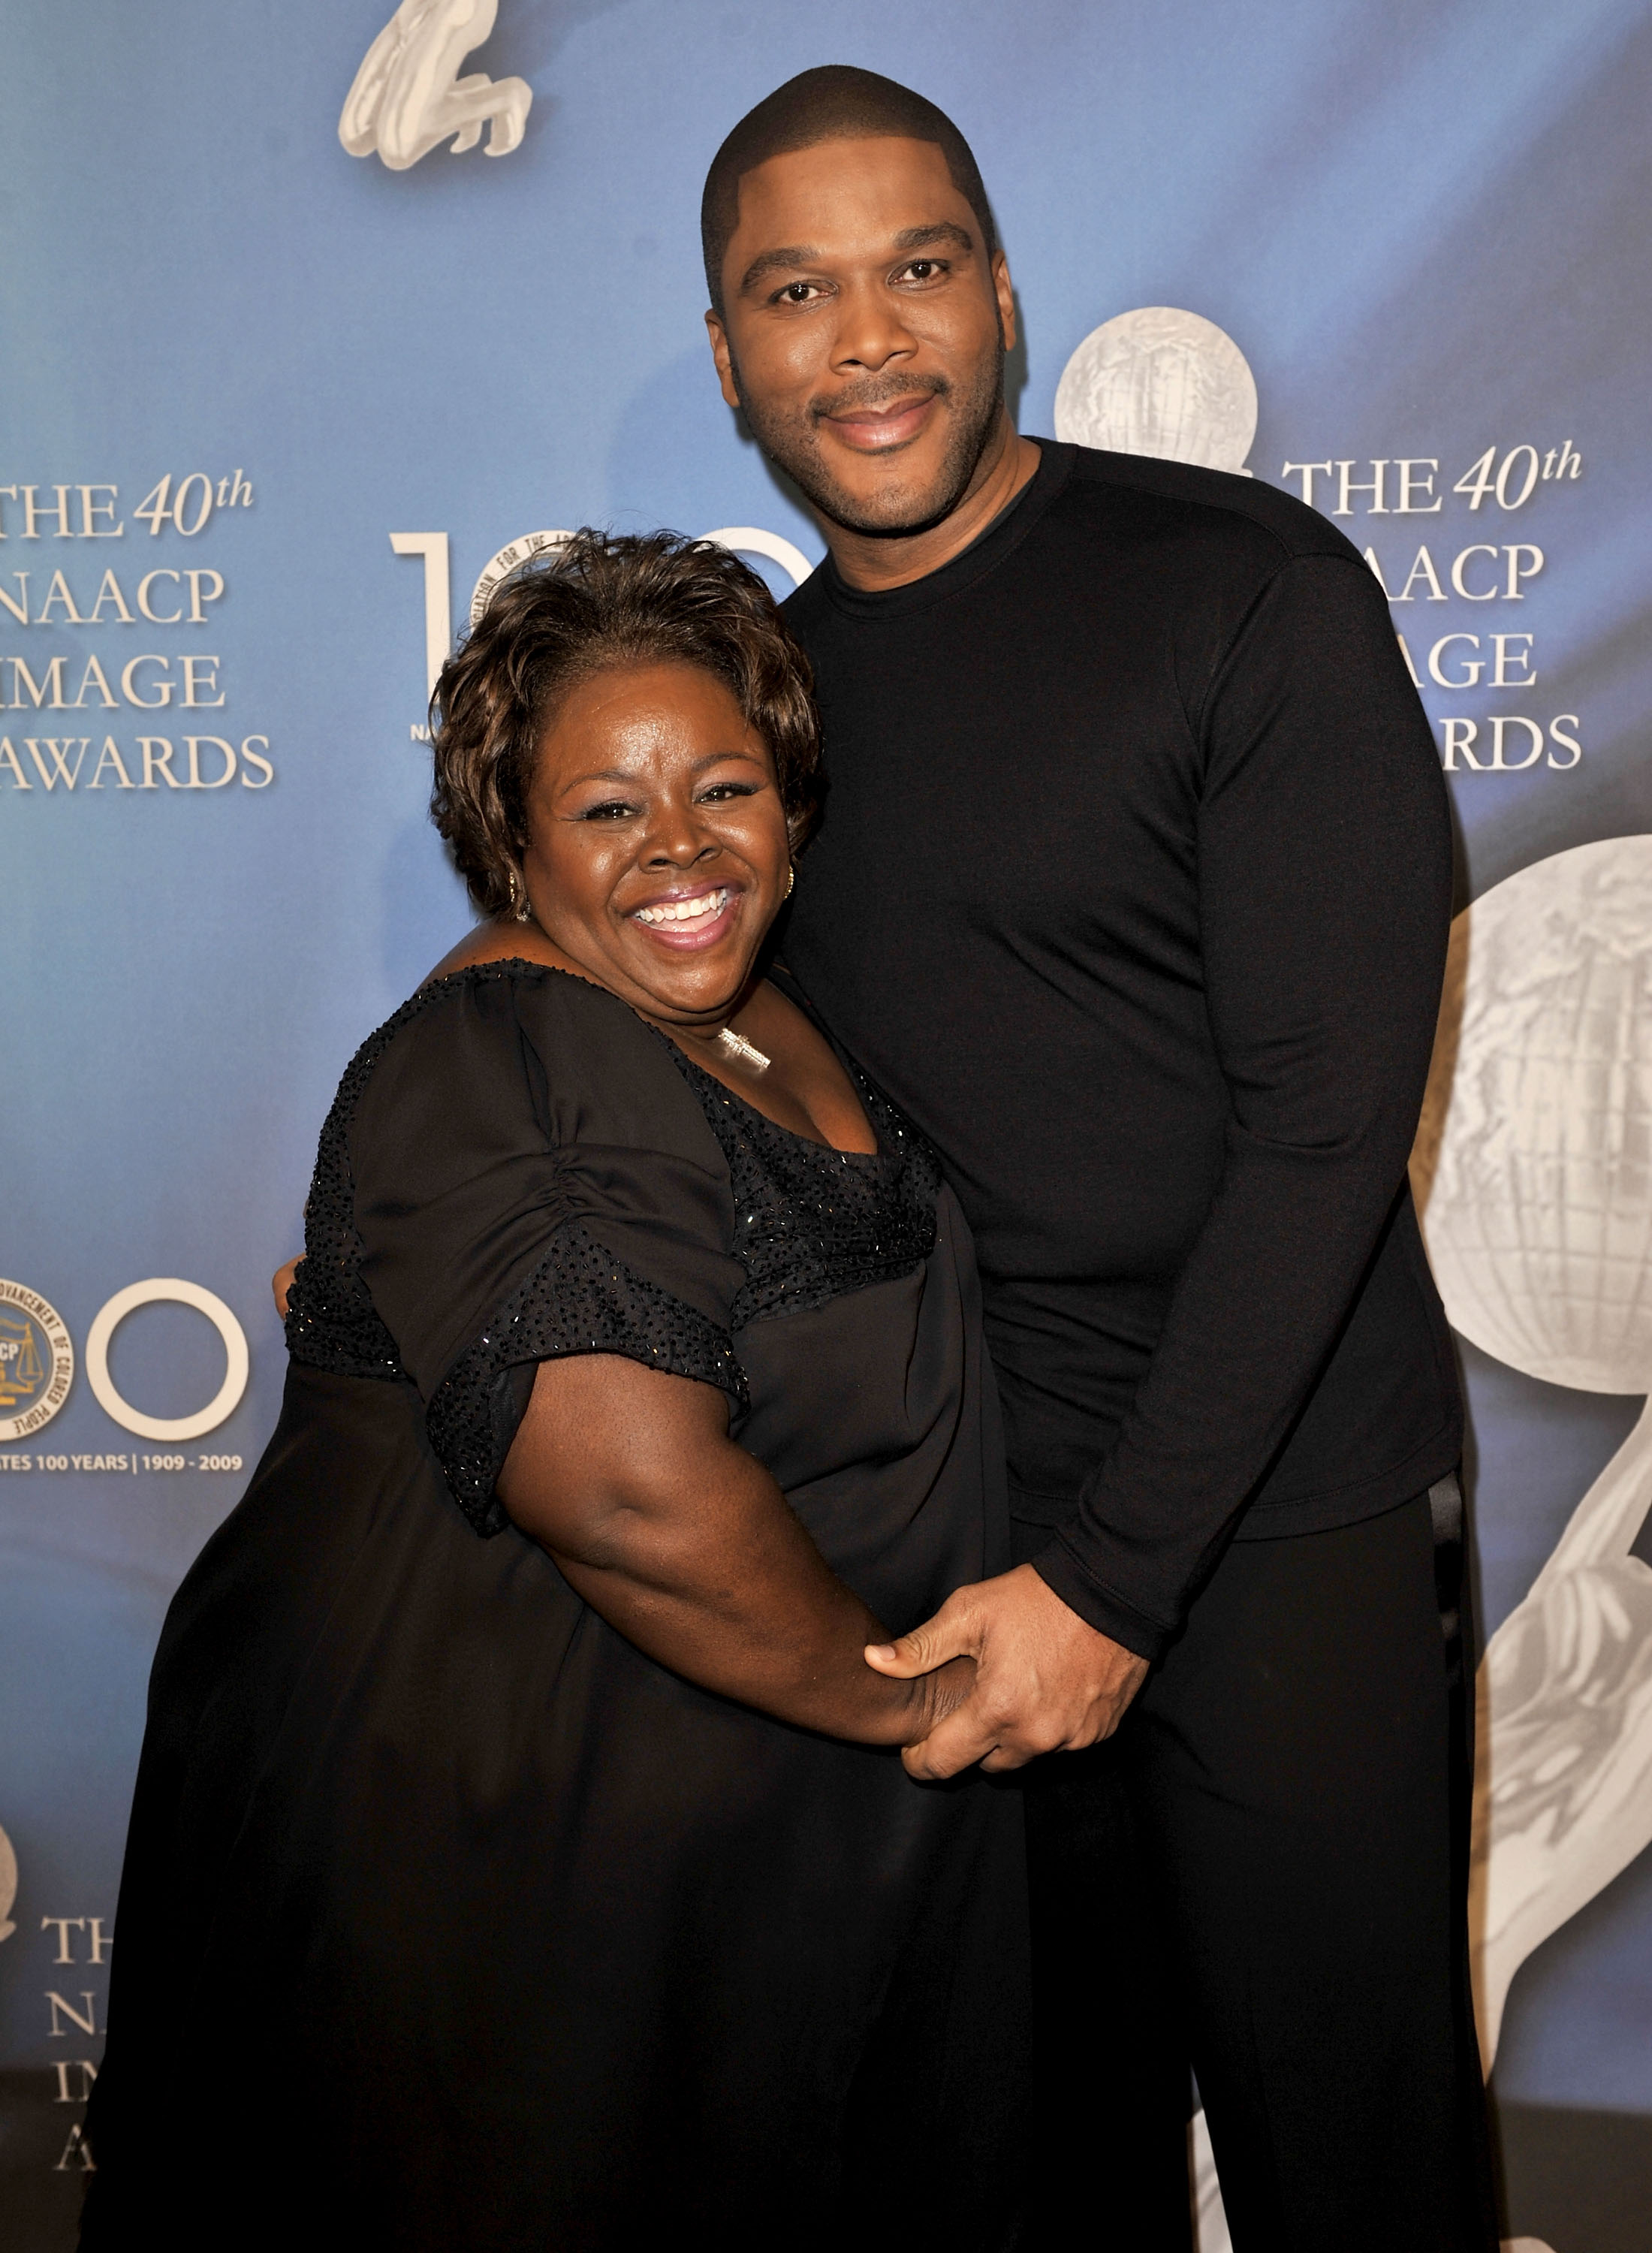 Tyler Perry and Cassi Davis arrive at the 40th NAACP Image Awards held at the Shrine Auditorium on February 12, 2009, in Los Angeles, California. | Source: Getty Images